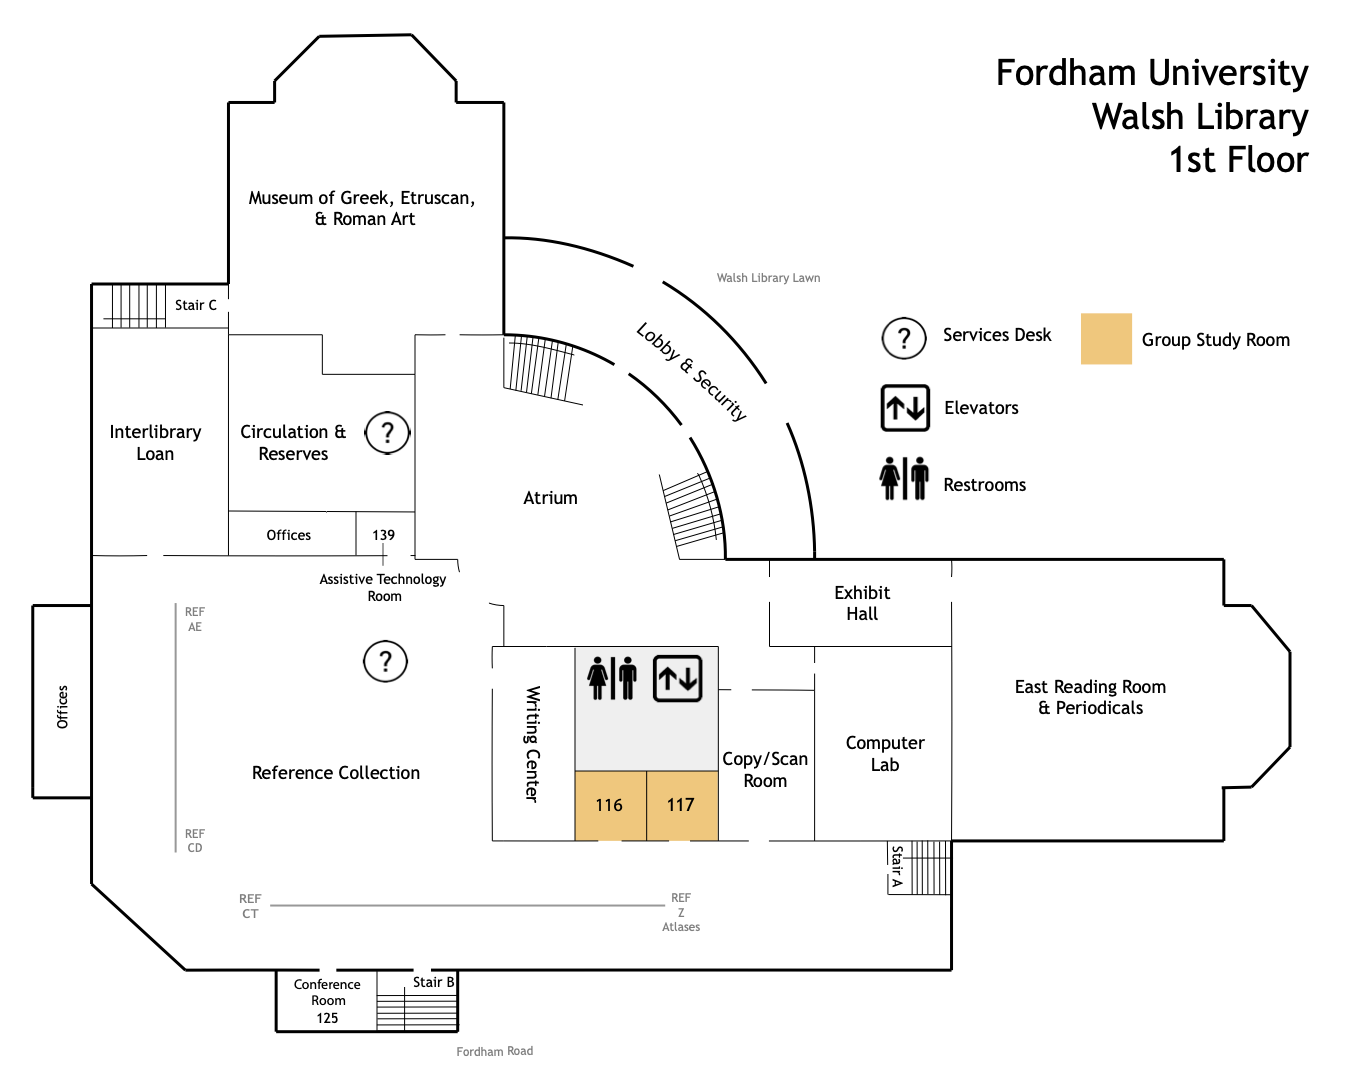 floor plan of Walsh Library, 1st floor, show 2 group study rooms 116 and 117 near the Writing Center